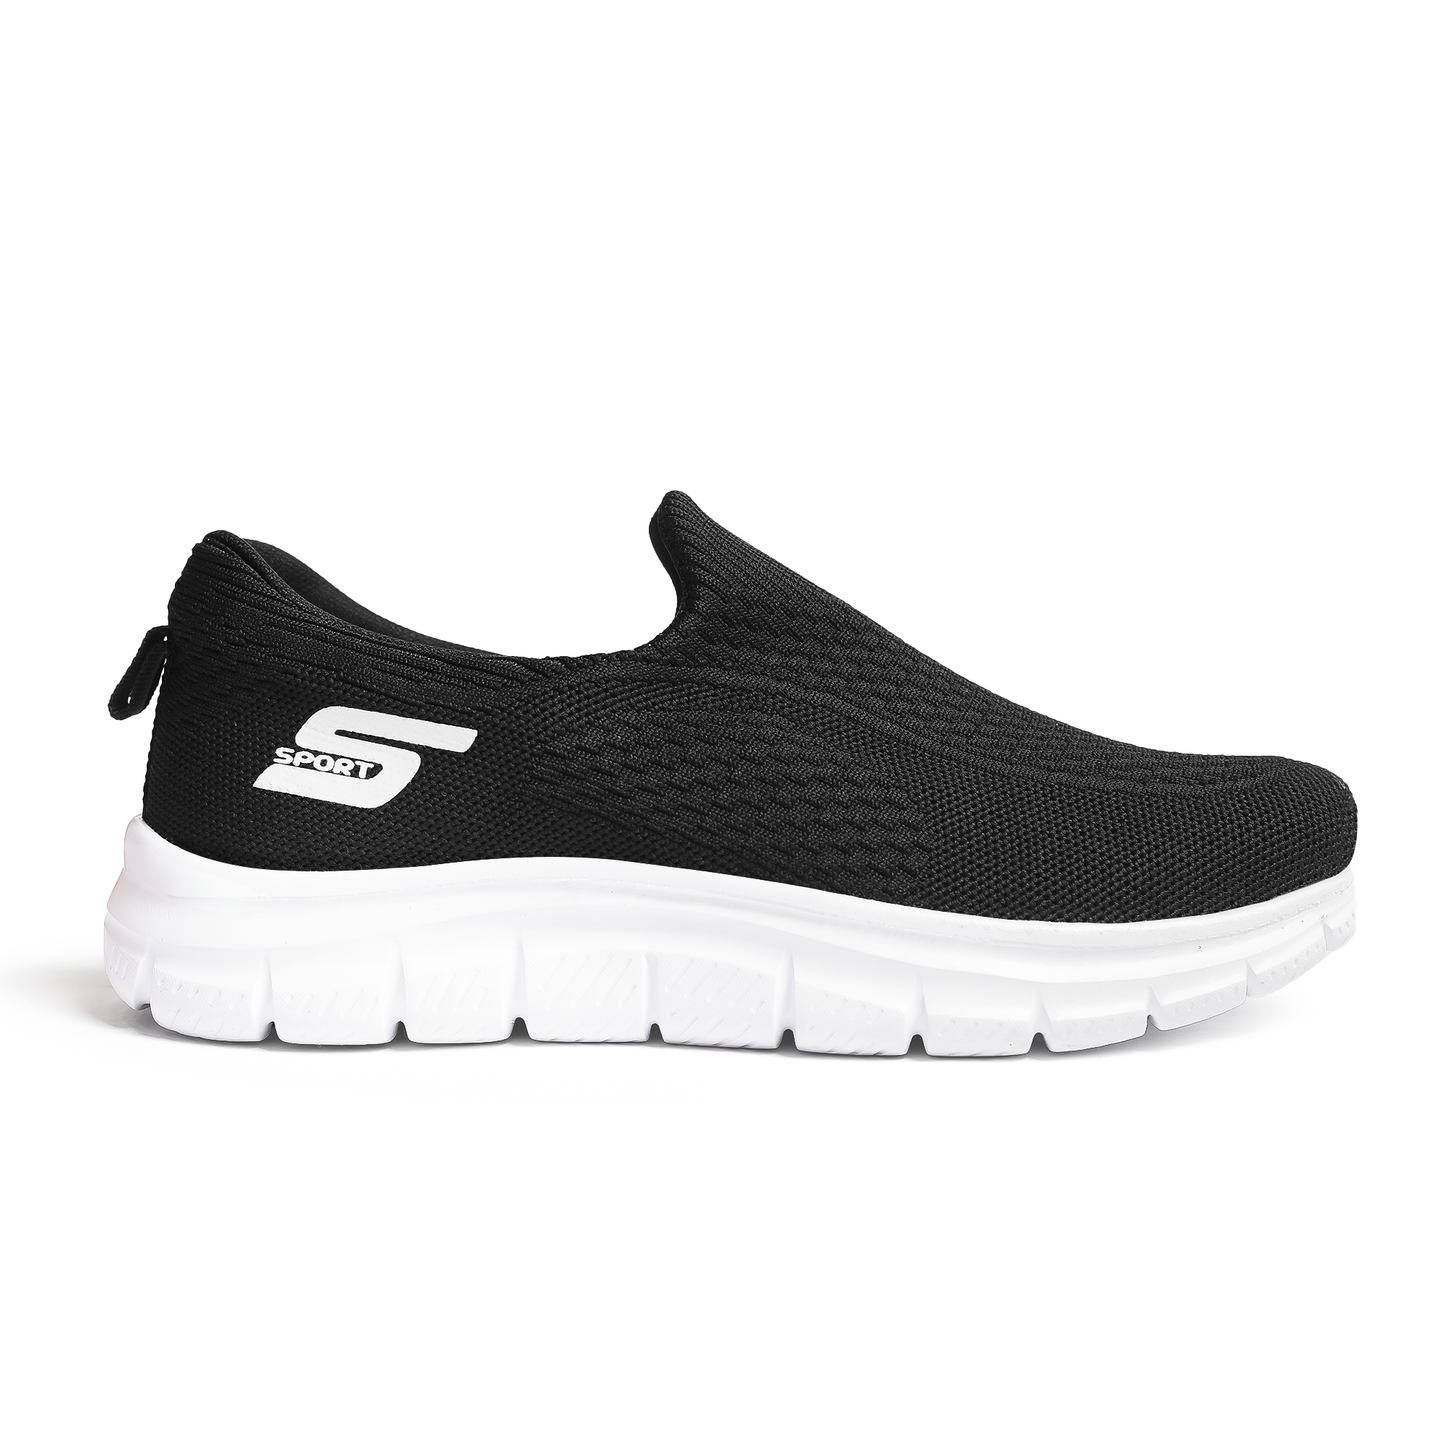 Sportive Comfy Light Weight Sneakers For Men